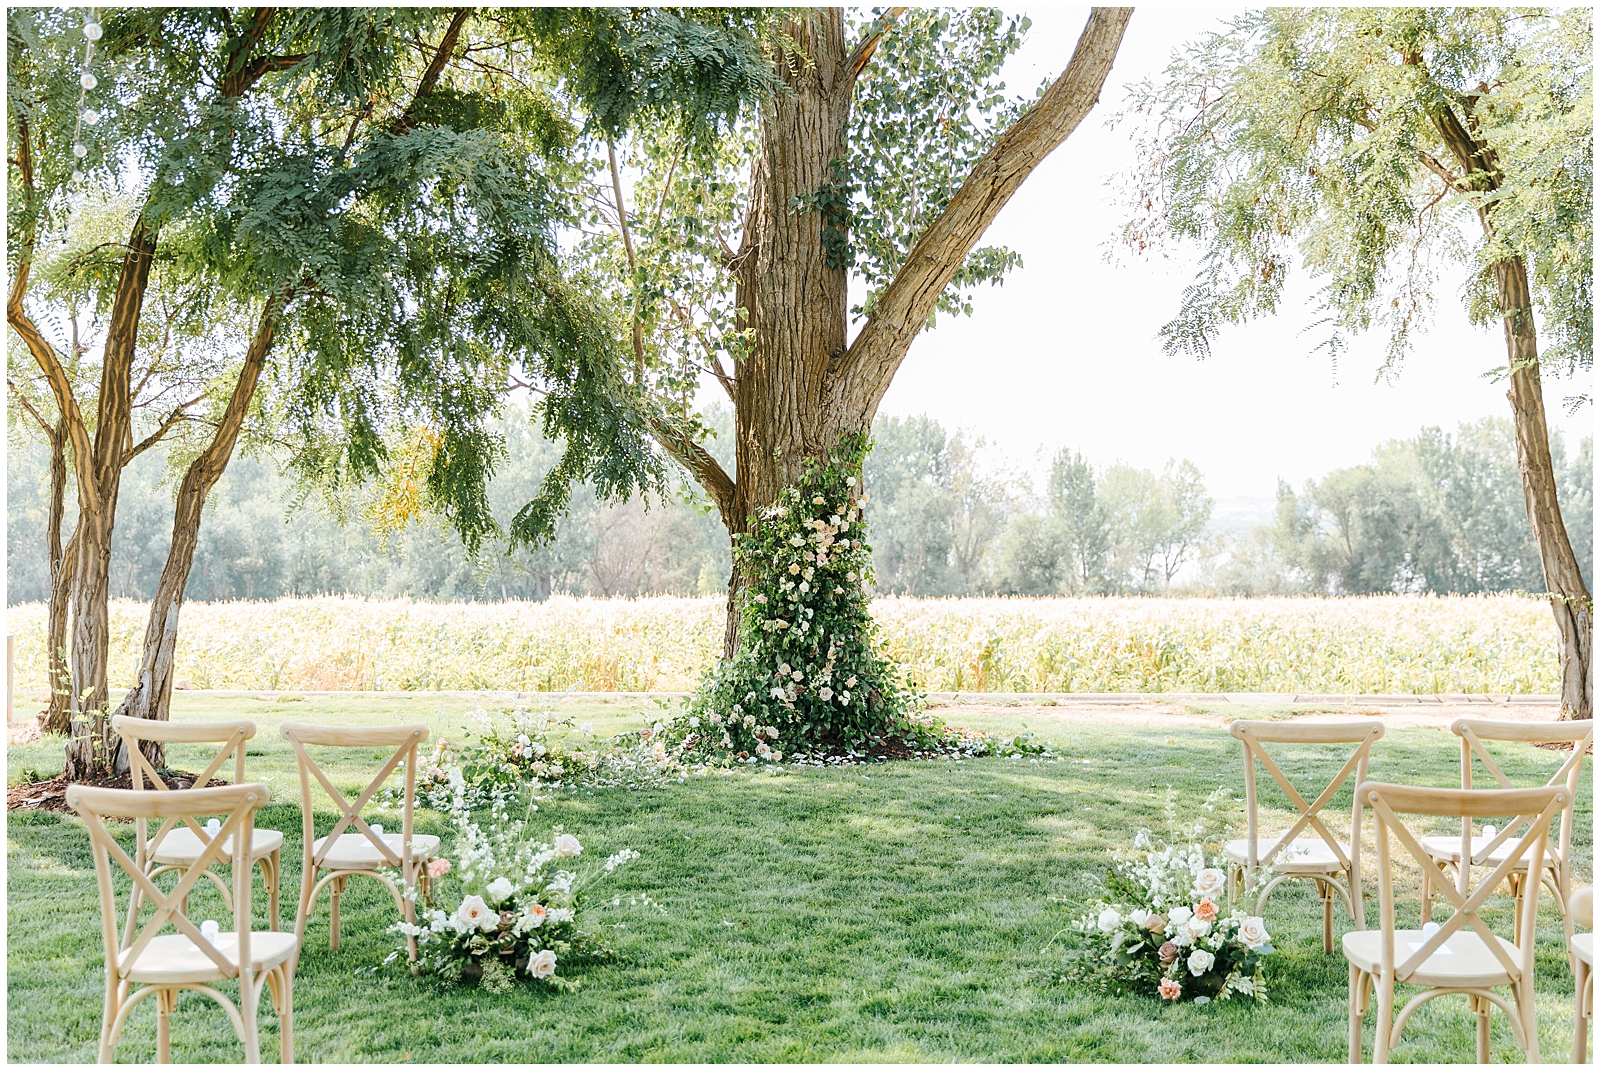 Ethereal Floral Trailing up the tree at Romantic Deer Flat Ranch Wedding